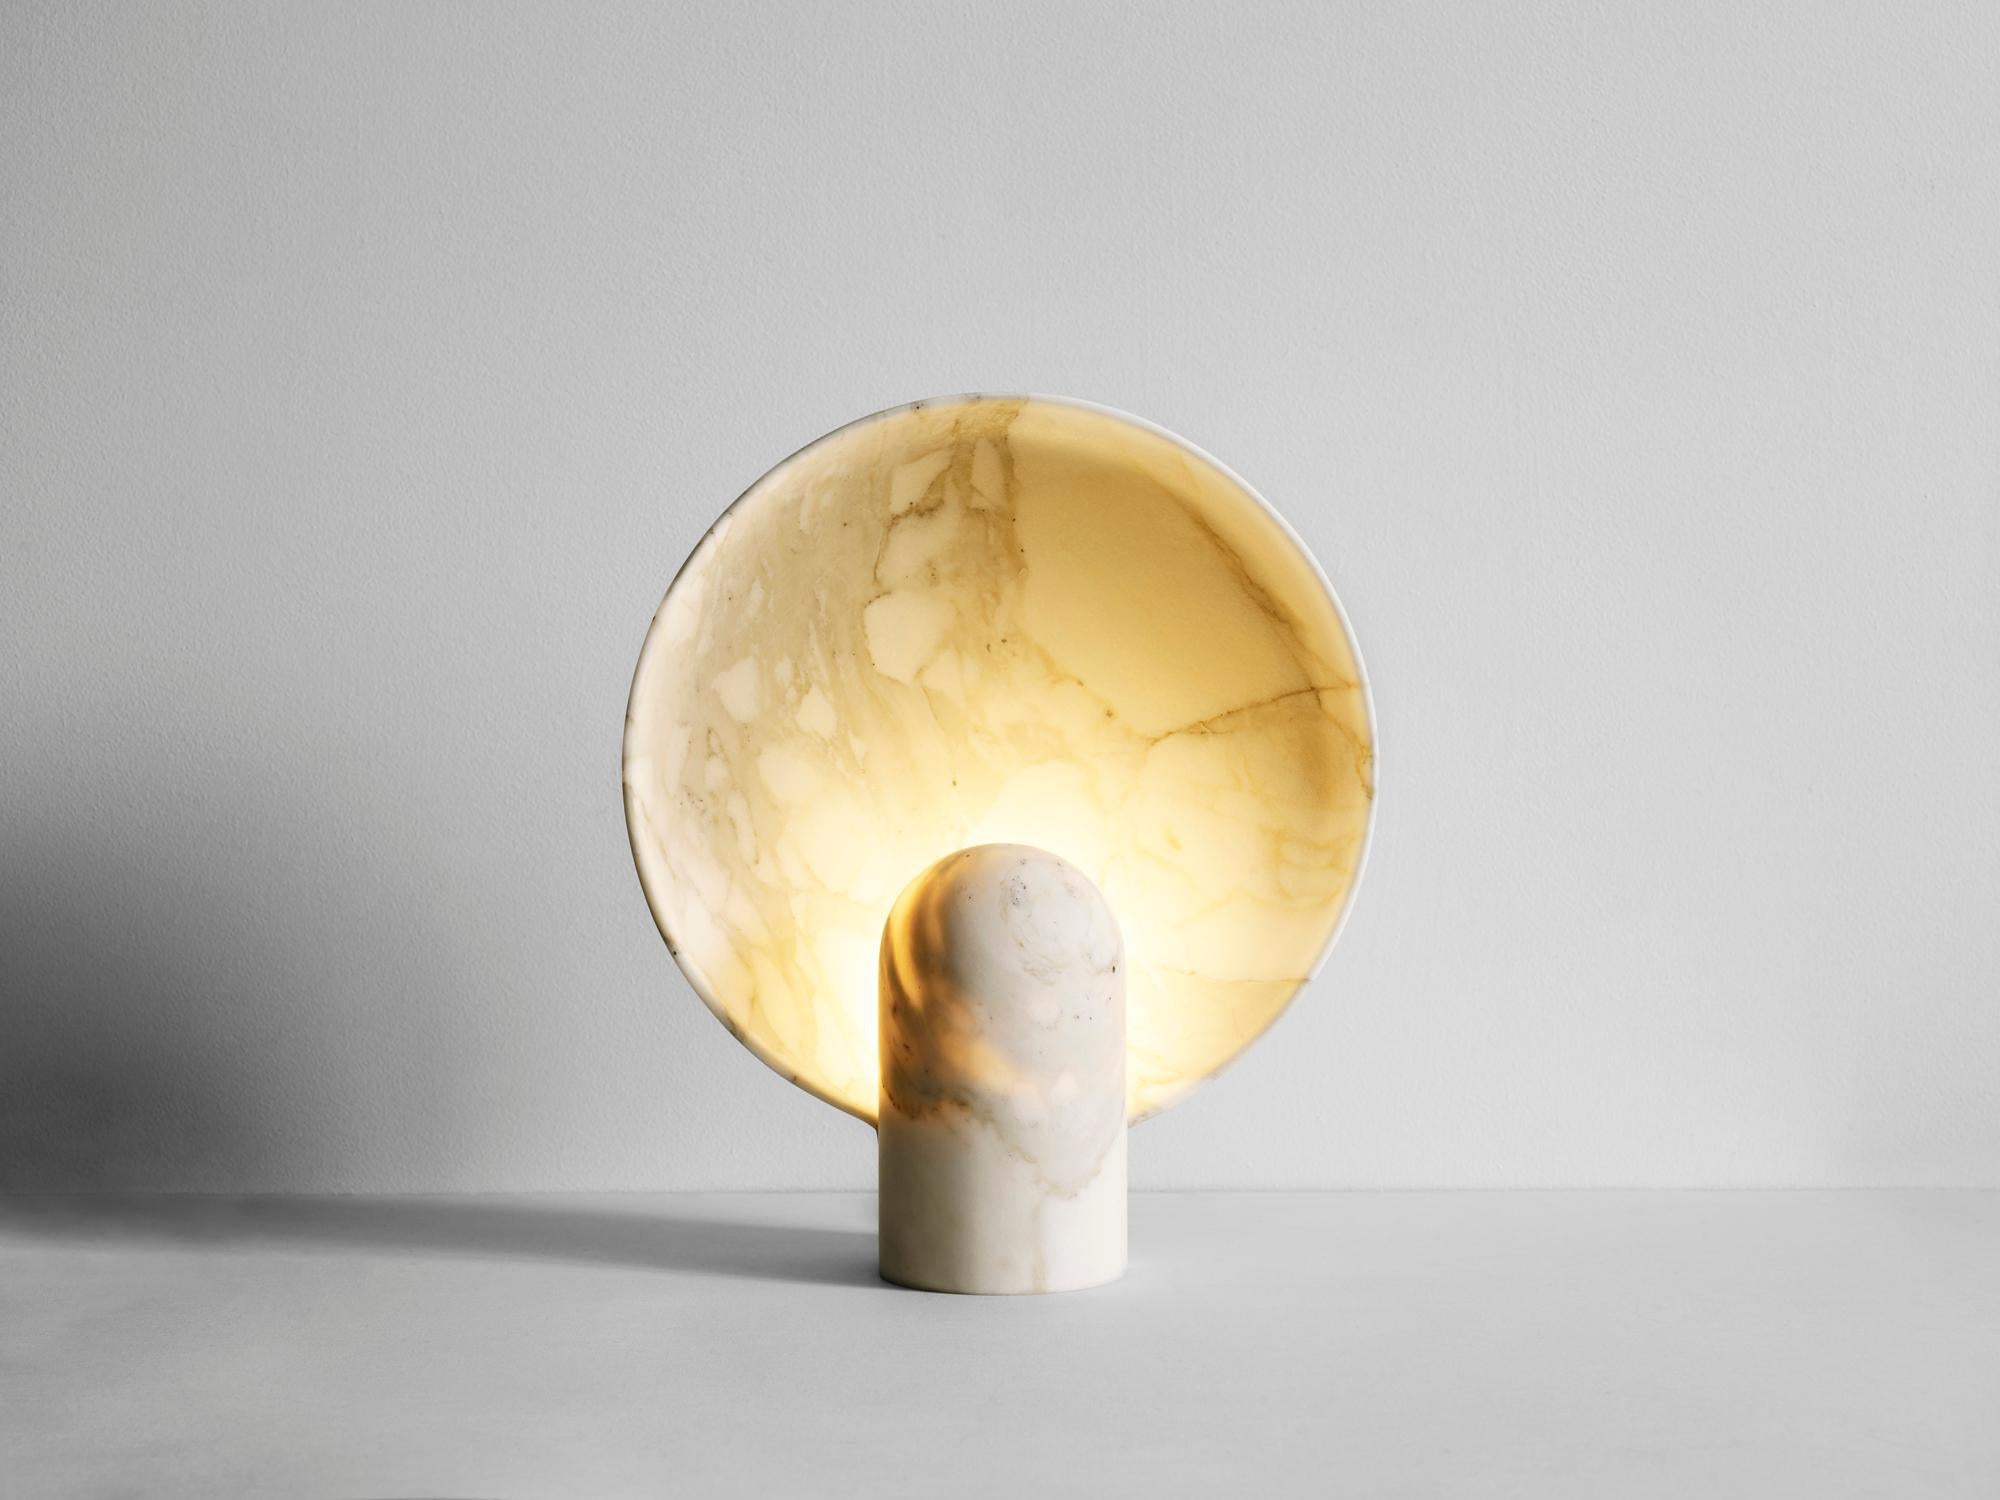 This sculptural item is handmade in Sydney Australia.

The surface sconce in Calacatta marble is an ambient, sculptural light carved in two halves from solid stone.

Each light is manufactured in natural stone, meaning variations of the pattern